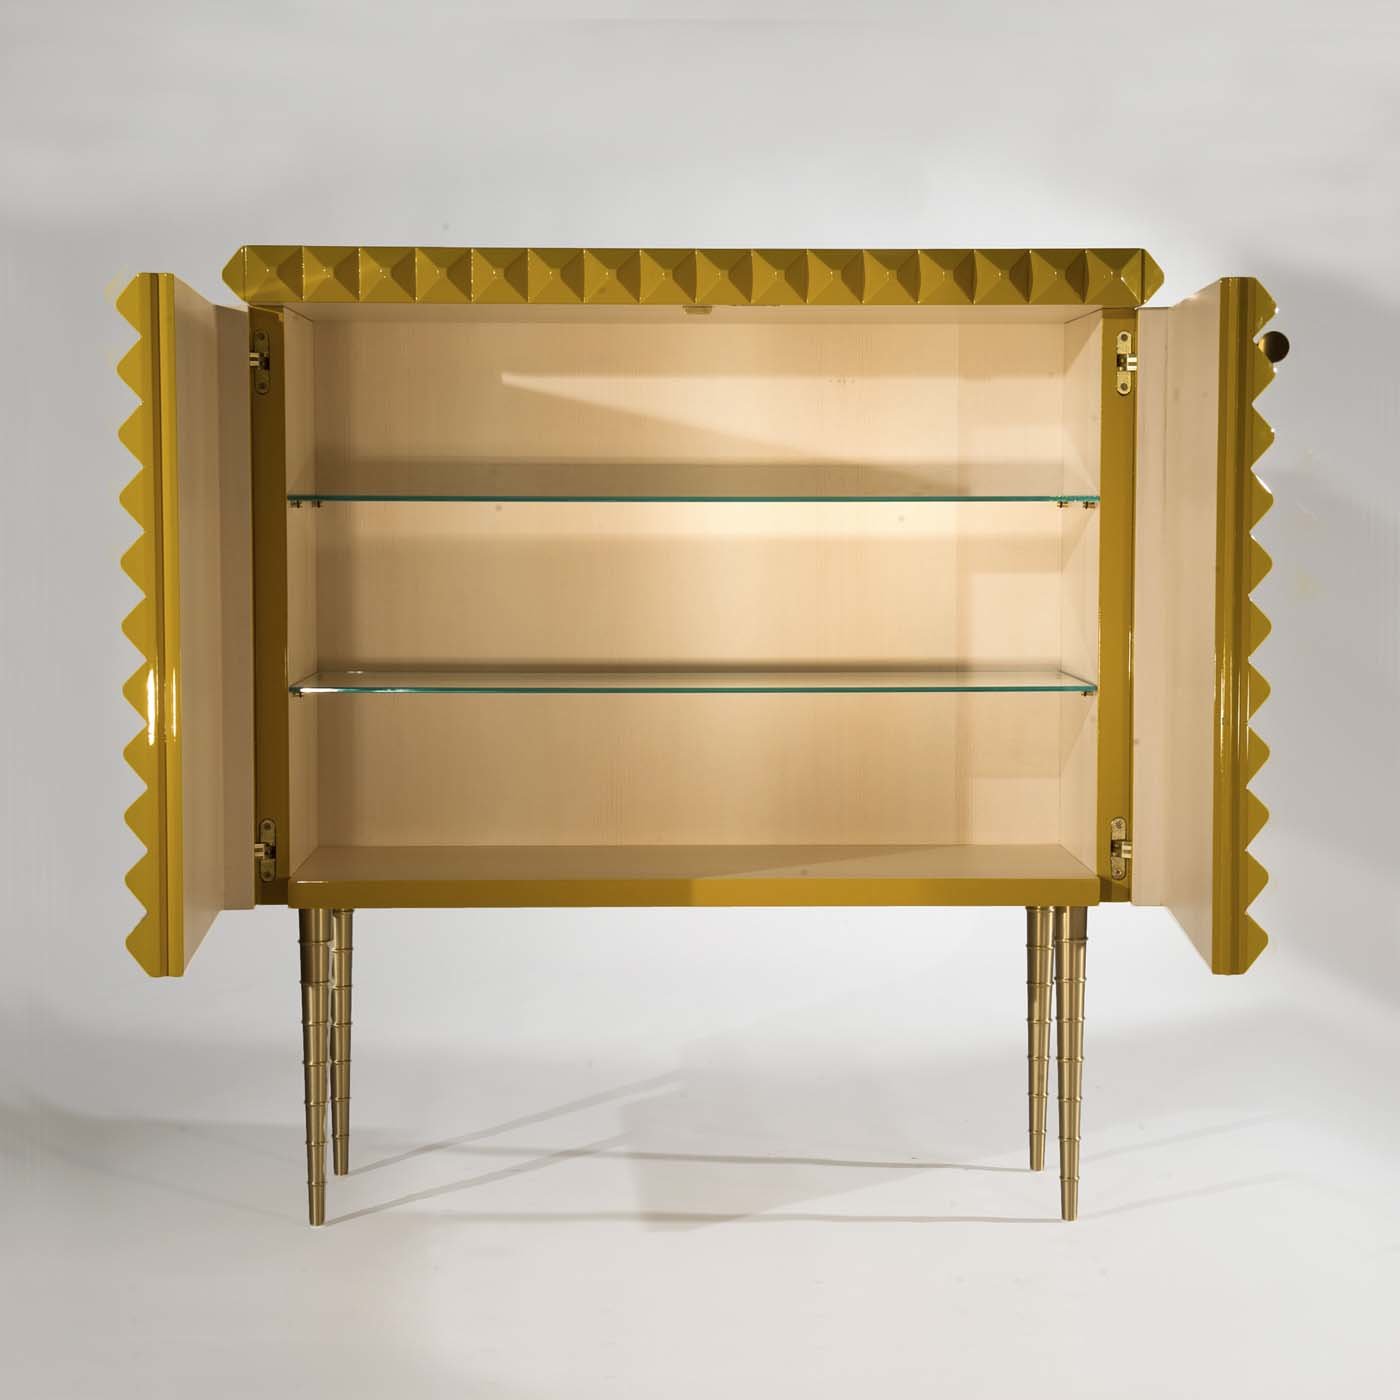 1940 Yellow Lacquered Cabinet by Paolo Buffa - Alternative view 1